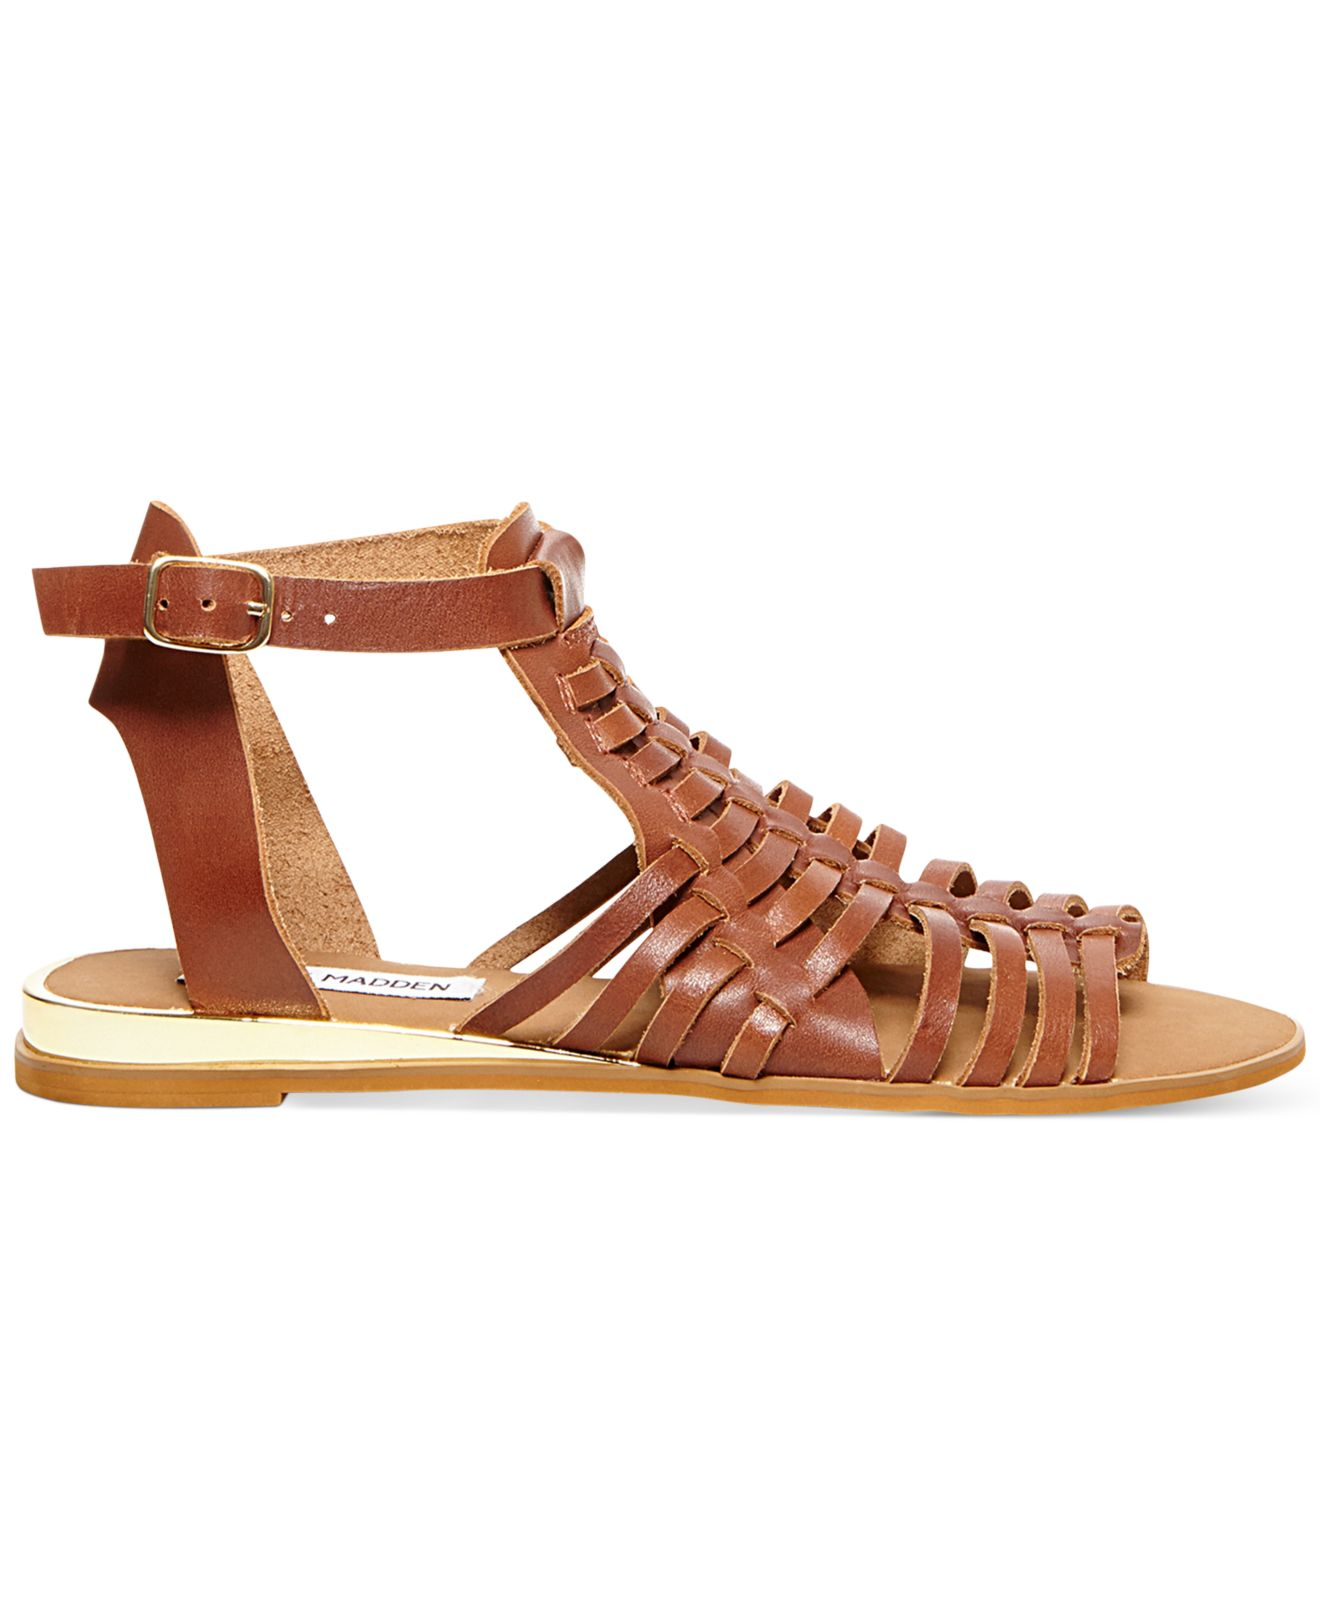 Steve Madden Women's Comely Flat Gladiator Sandals in Cognac (Brown) - Lyst